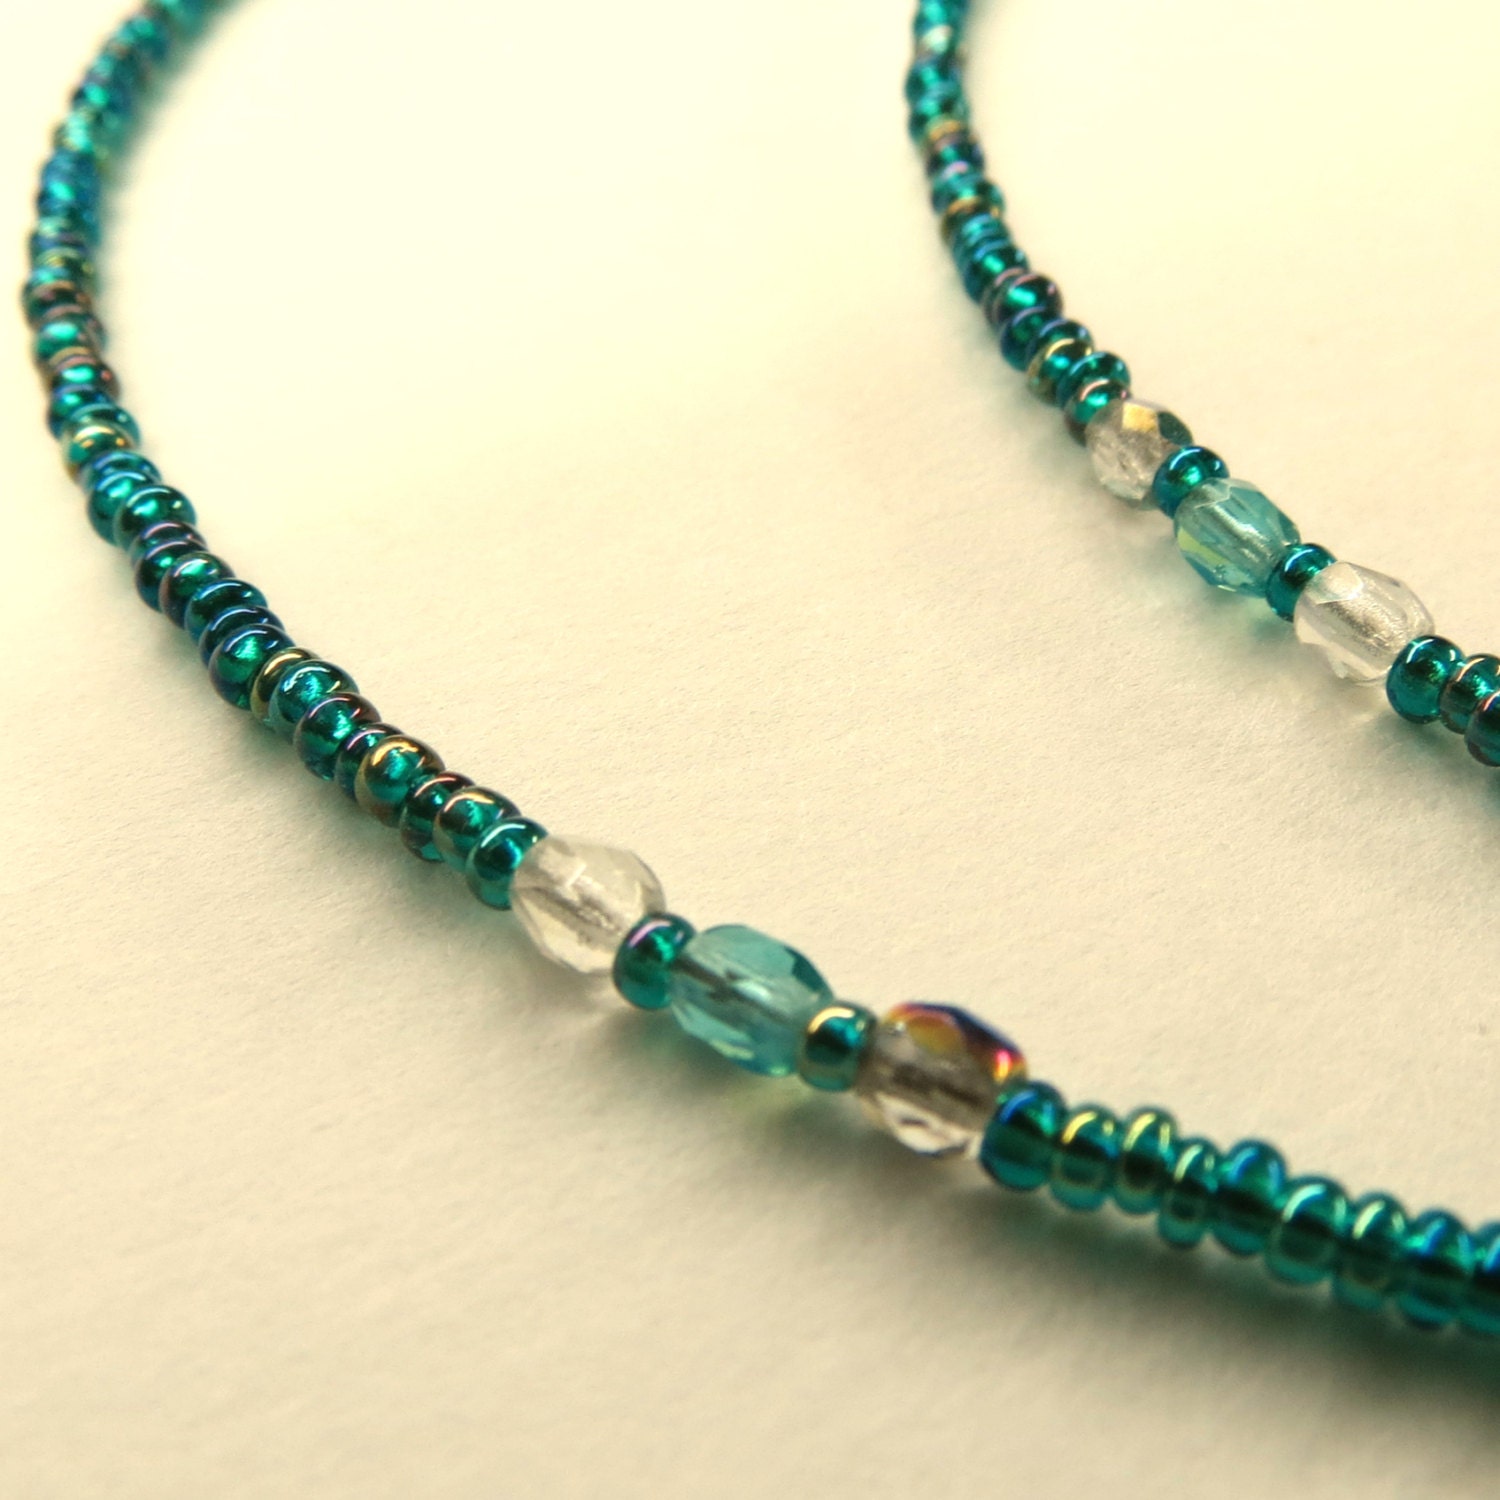 Irridescent Teal Glass Beads Eyeglasses Chain by BeadDEyes on Etsy